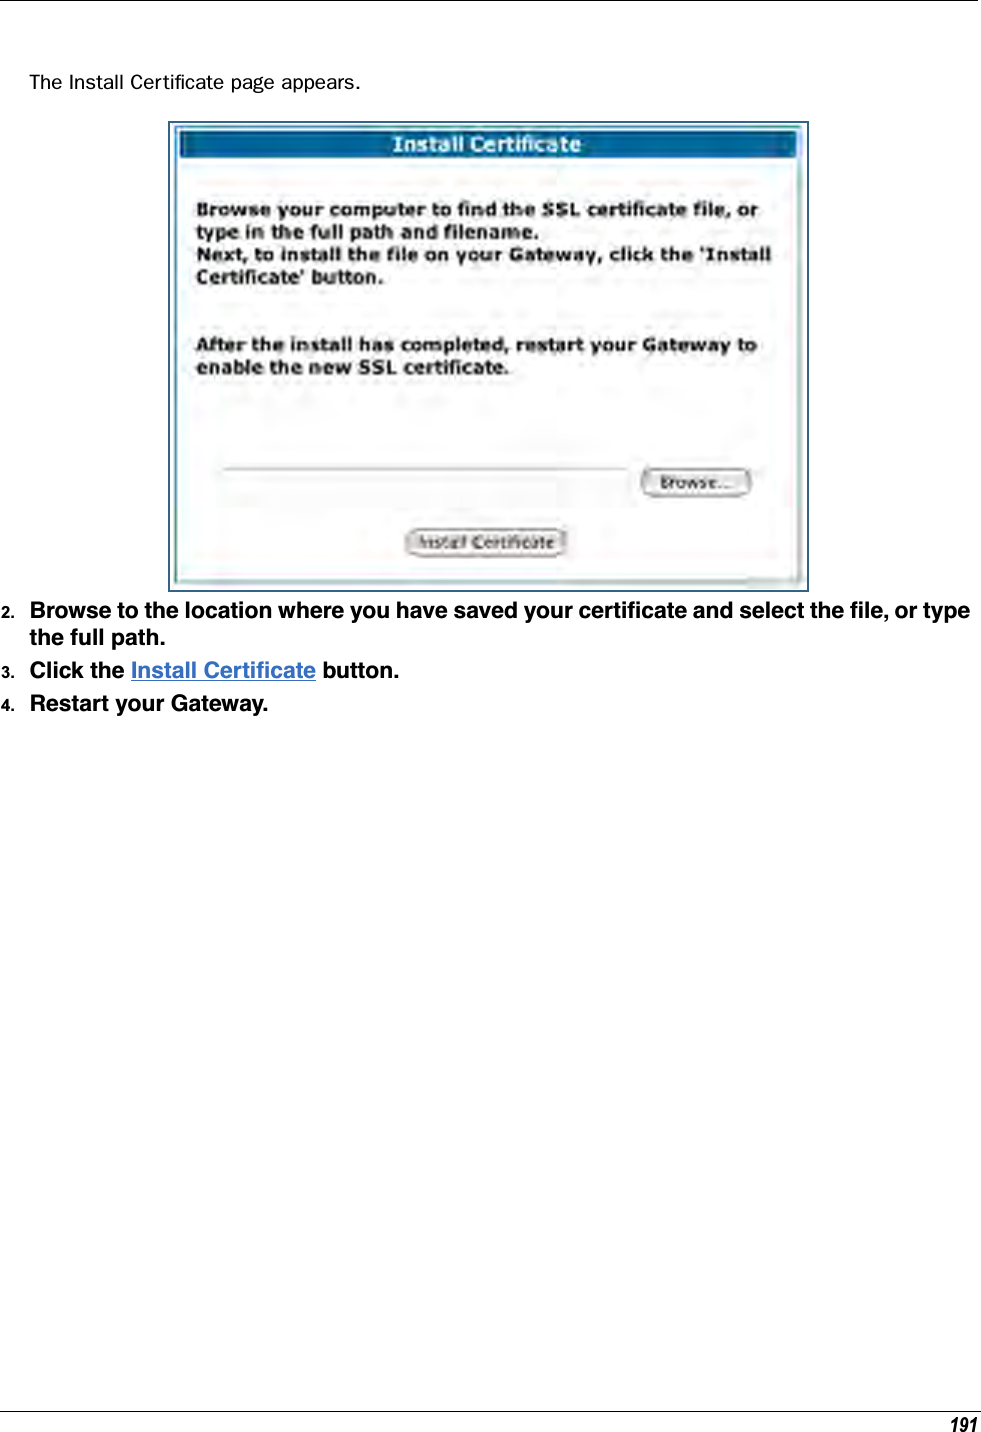 191The Install Certiﬁcate page appears.2. Browse to the location where you have saved your certiﬁcate and select the ﬁle, or type the full path.3. Click the Install Certiﬁcate button.4. Restart your Gateway.